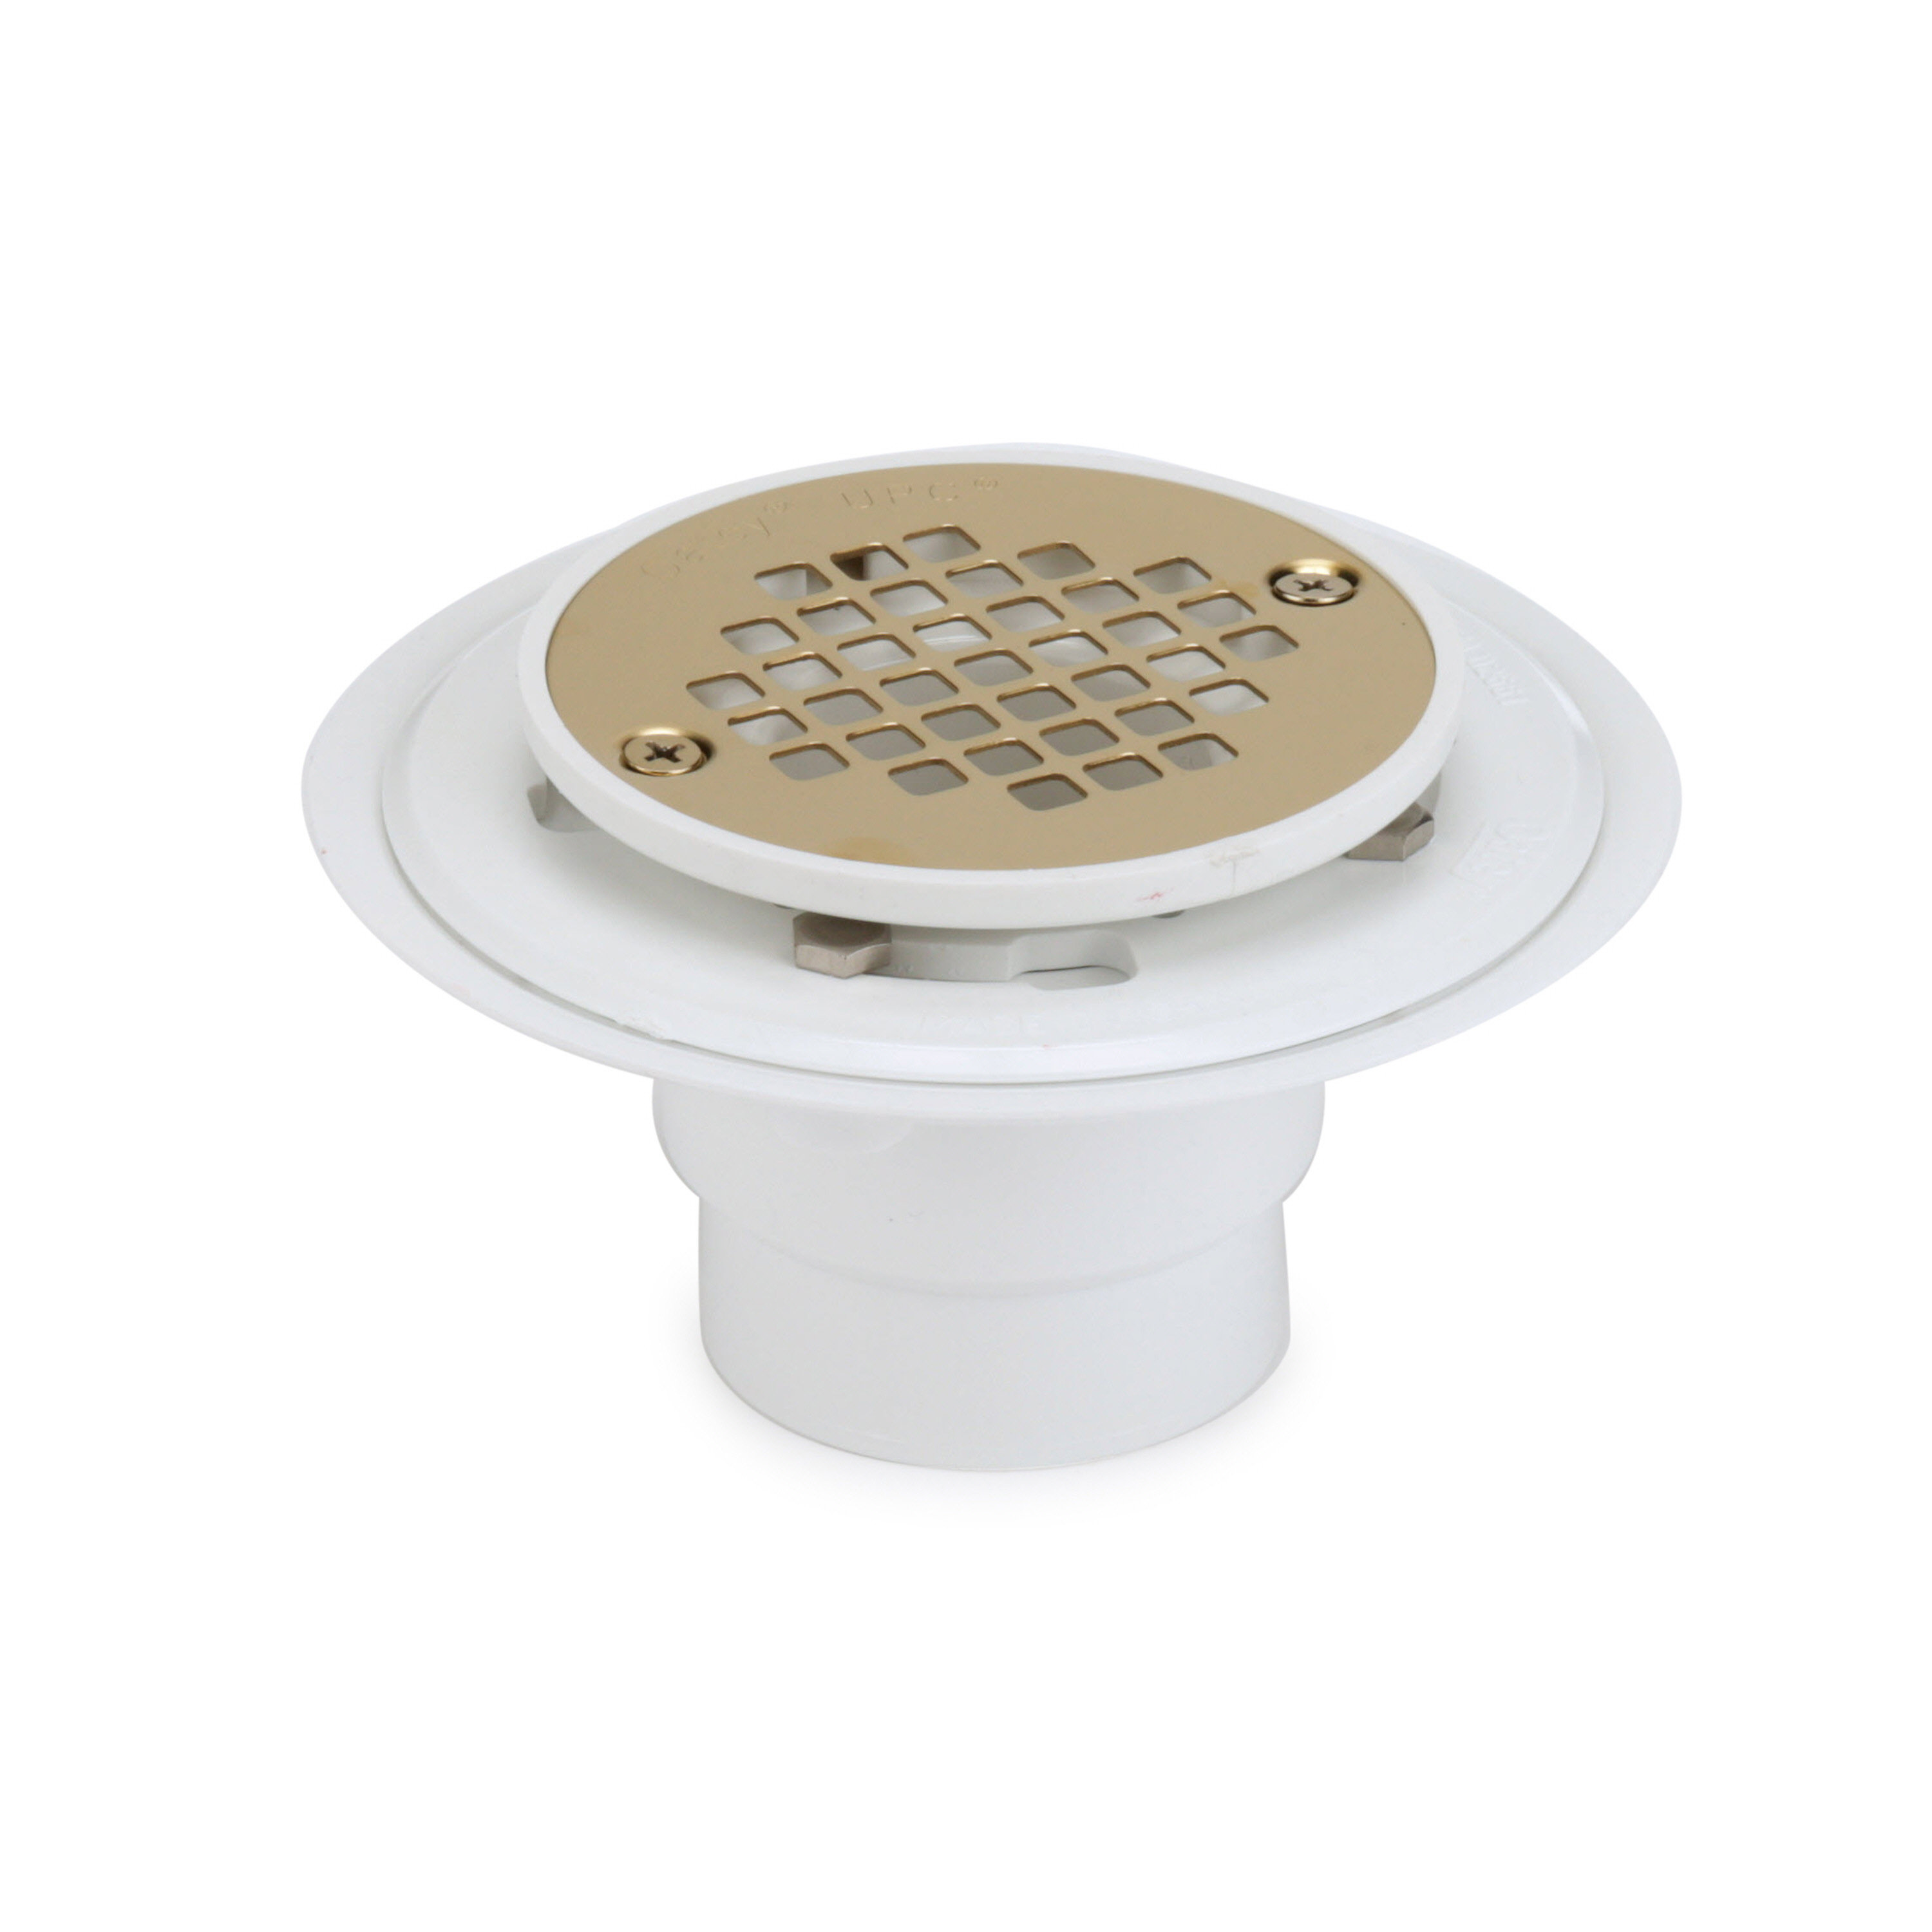 Oatey 3-in PVC Round White Snap-in Drain in the Shower Drains department at